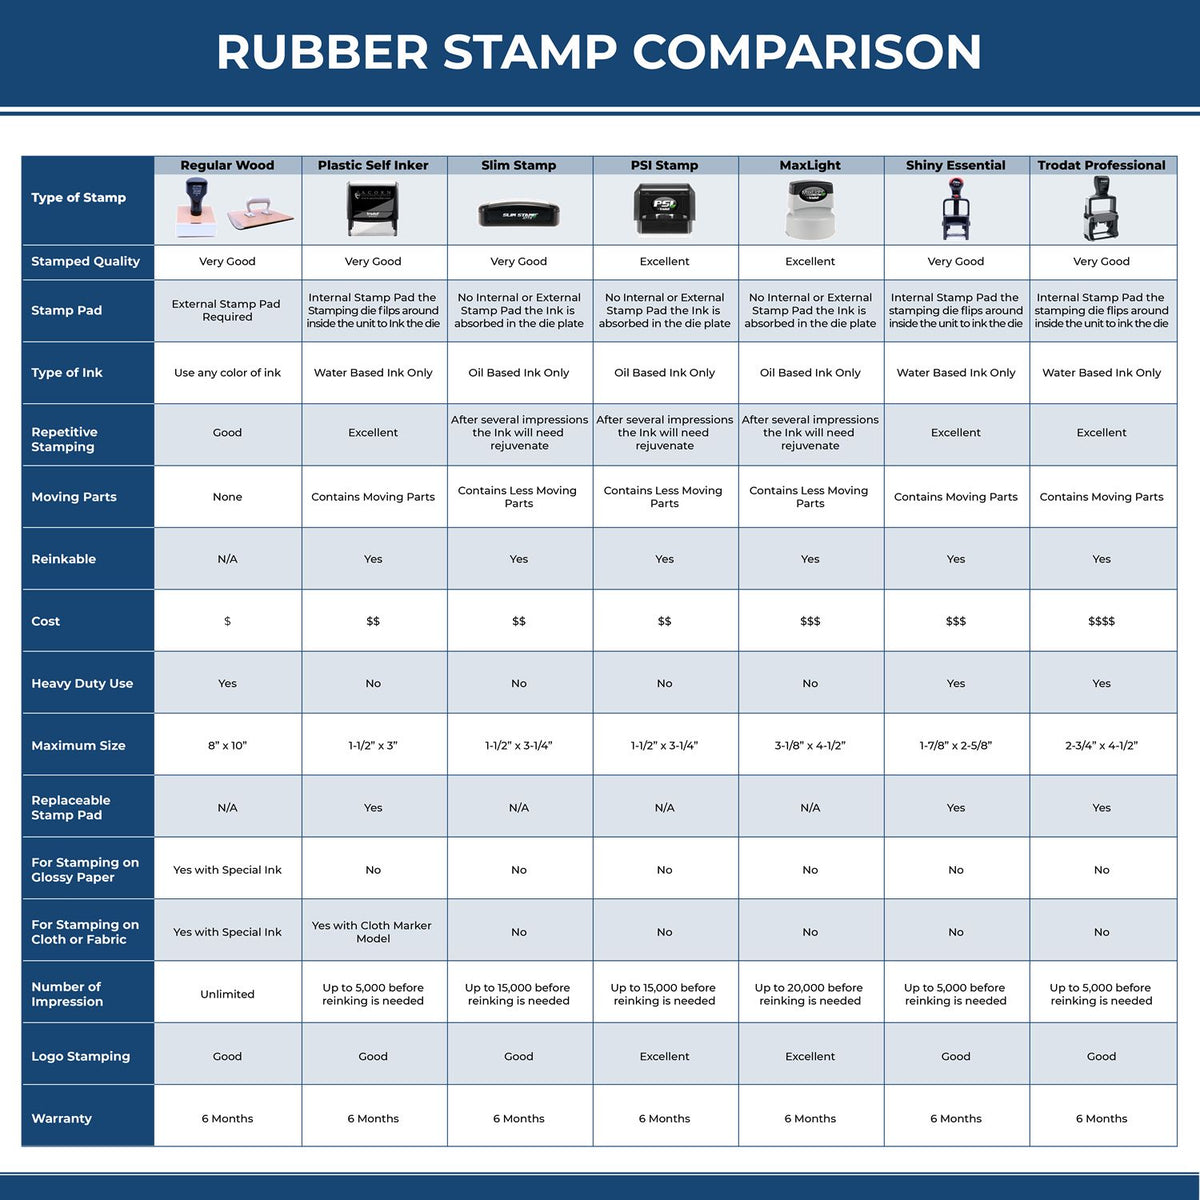 Large Self-Inking Bold Banco Stamp 5517S Rubber Stamp Comparison